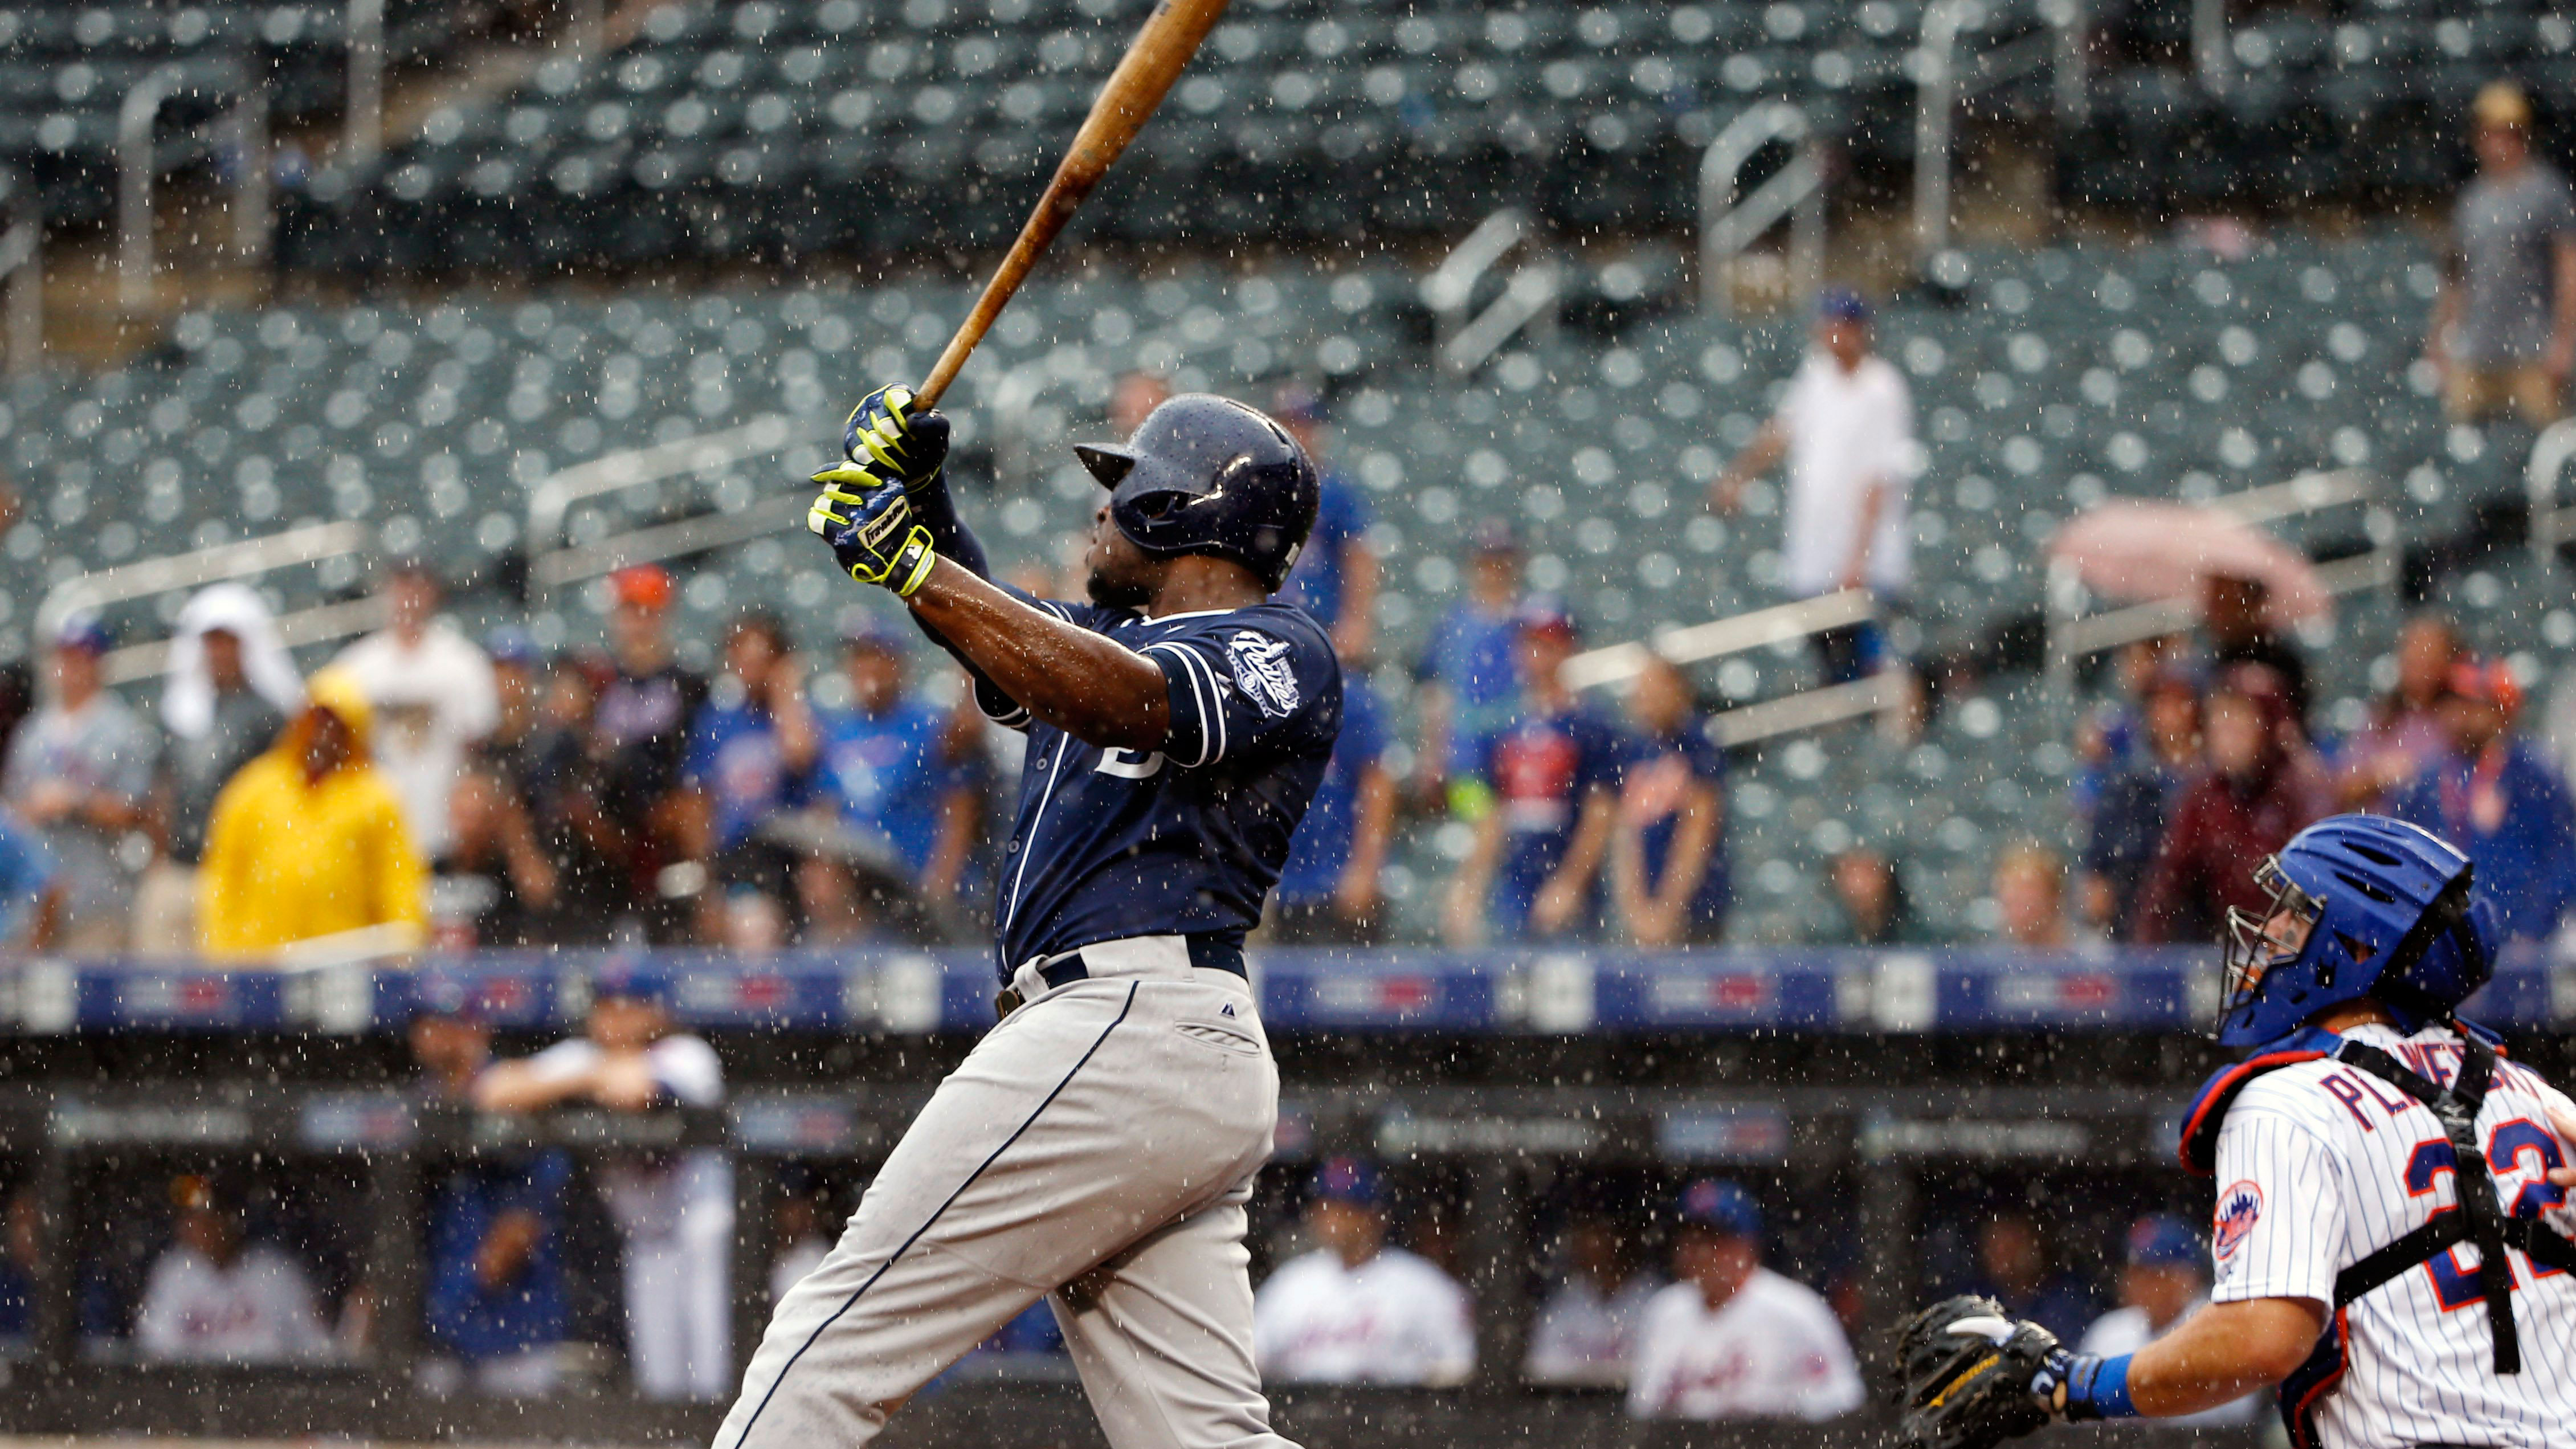 As rain falls, San Diego Padres' Justin Upton, left, hits a ninth-inning three-run home run off New York Mets relief pitcher Jeurys Familia. (Kathy Willens/AP)